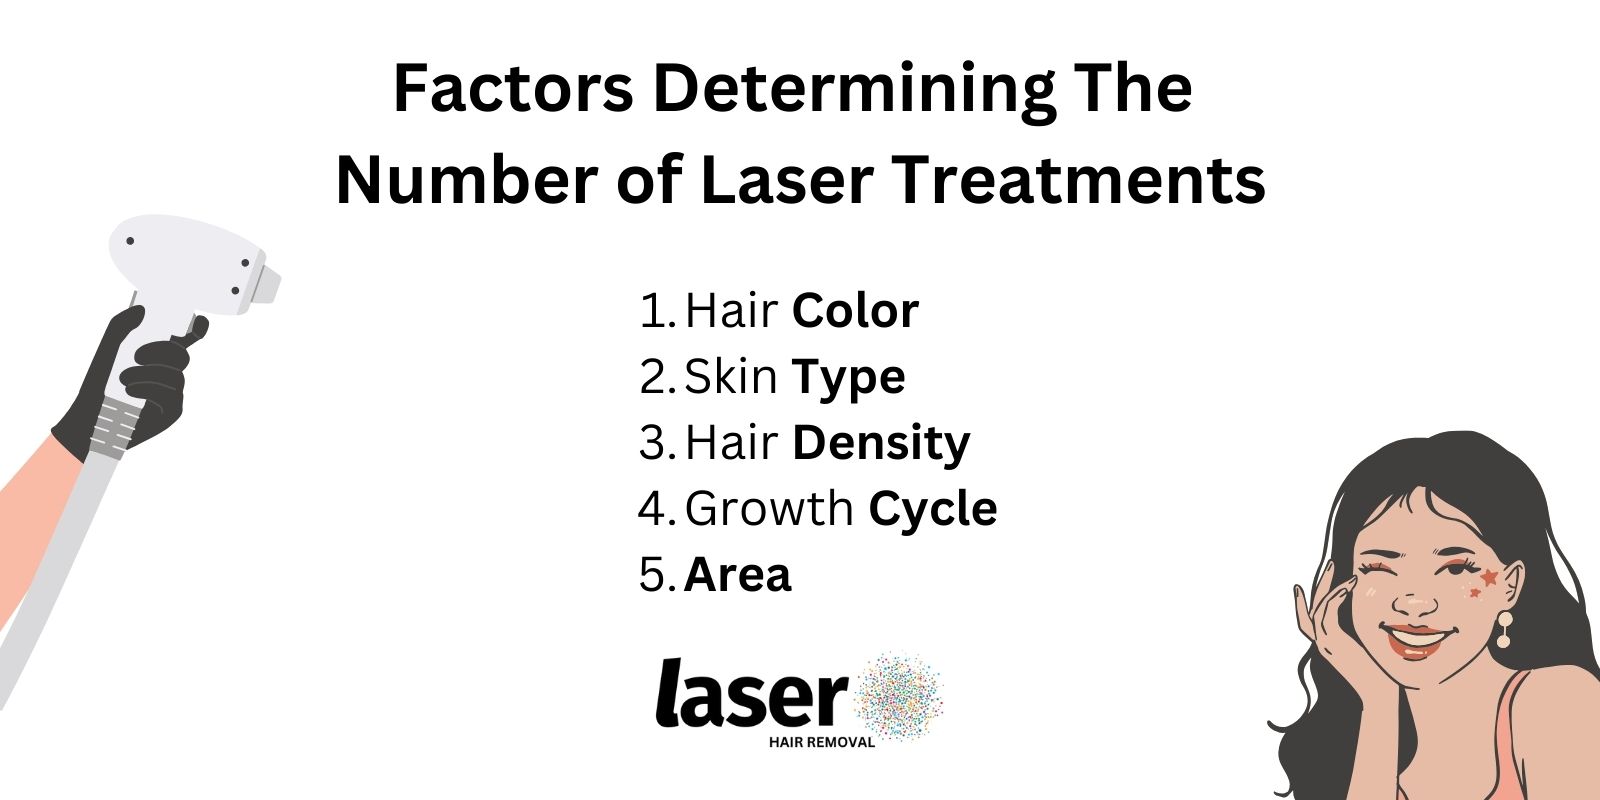 Factors Determining The Number of Laser Treatments